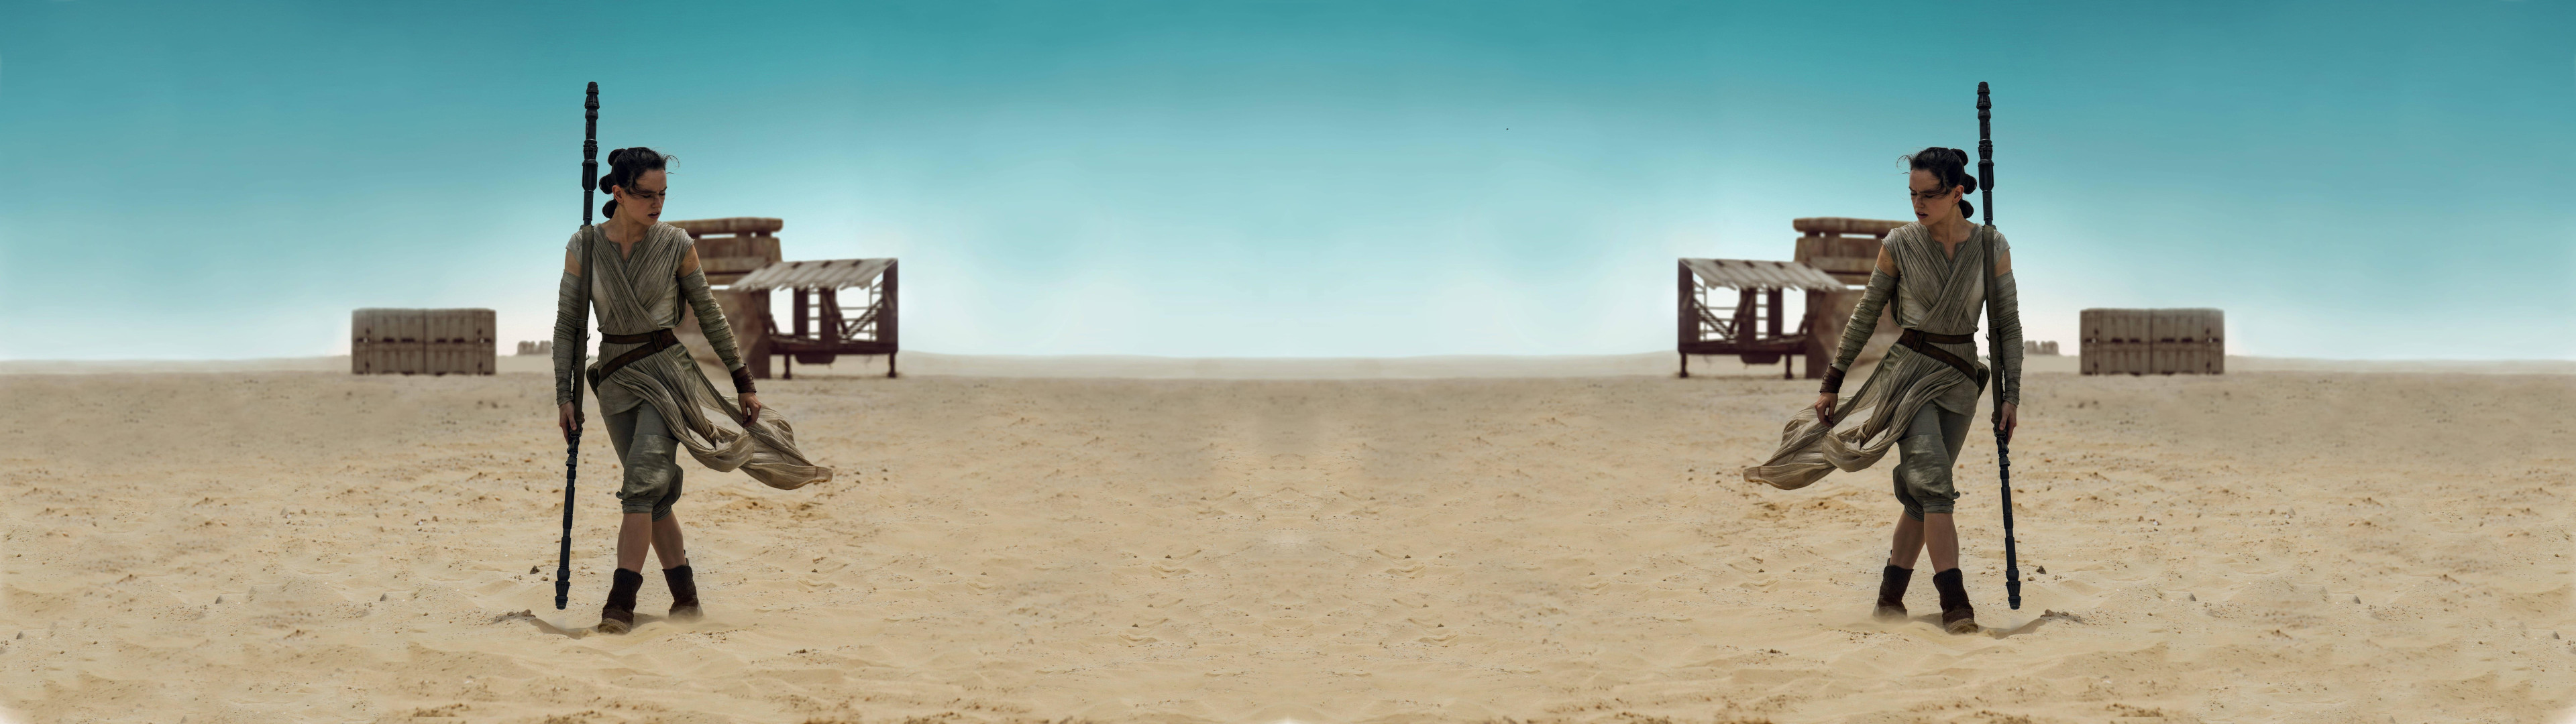 [3840×1080] Simple Rey & Reflection